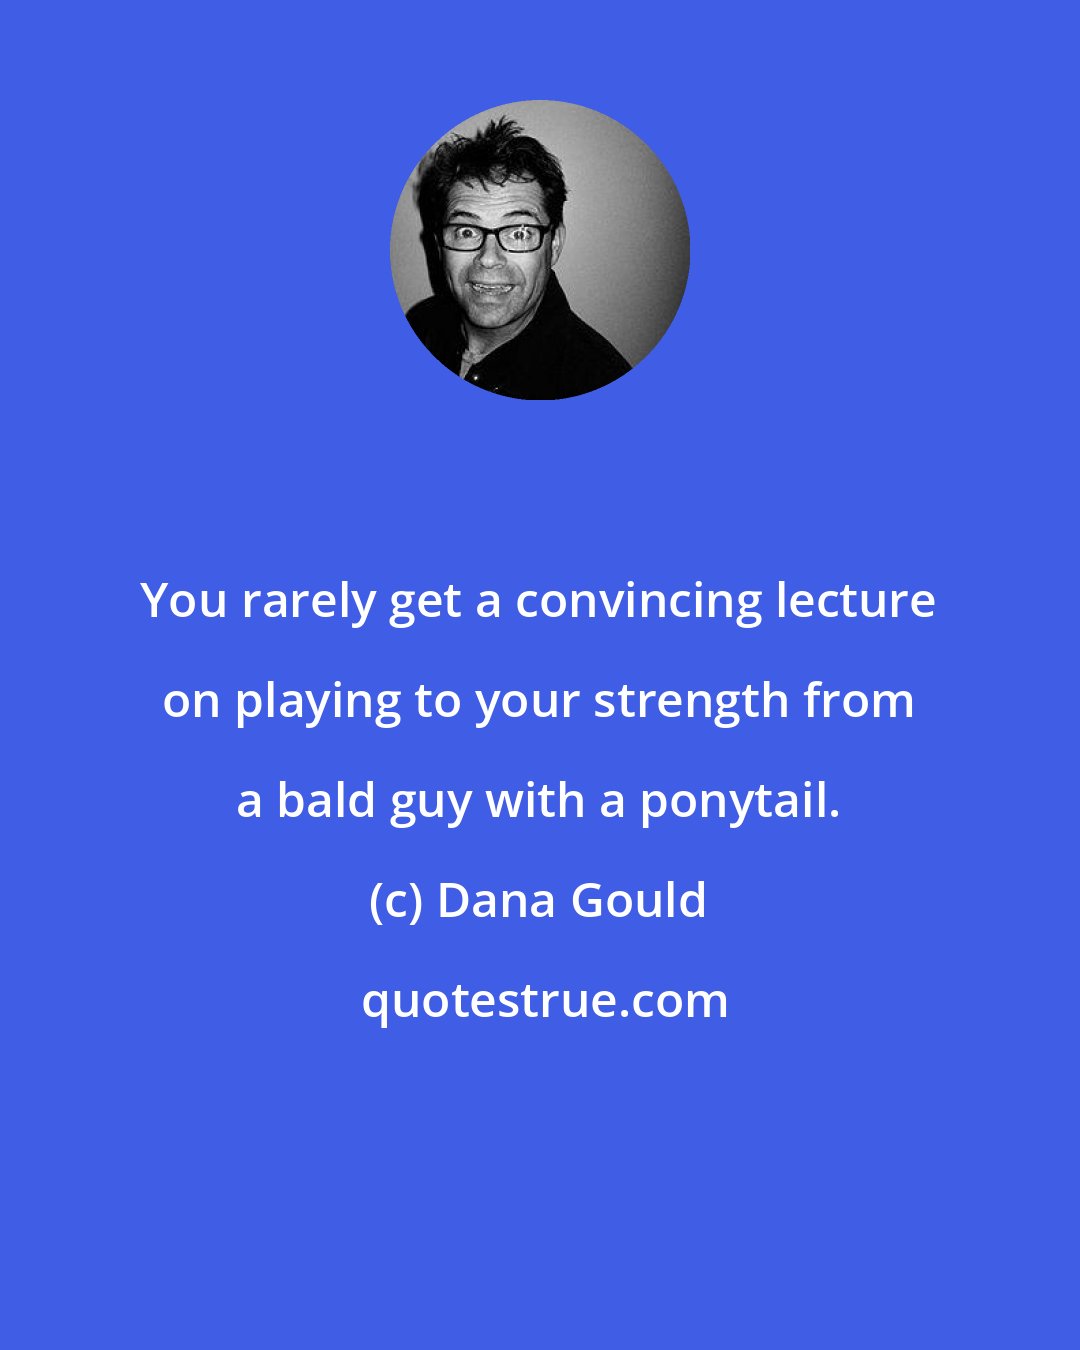 Dana Gould: You rarely get a convincing lecture on playing to your strength from a bald guy with a ponytail.